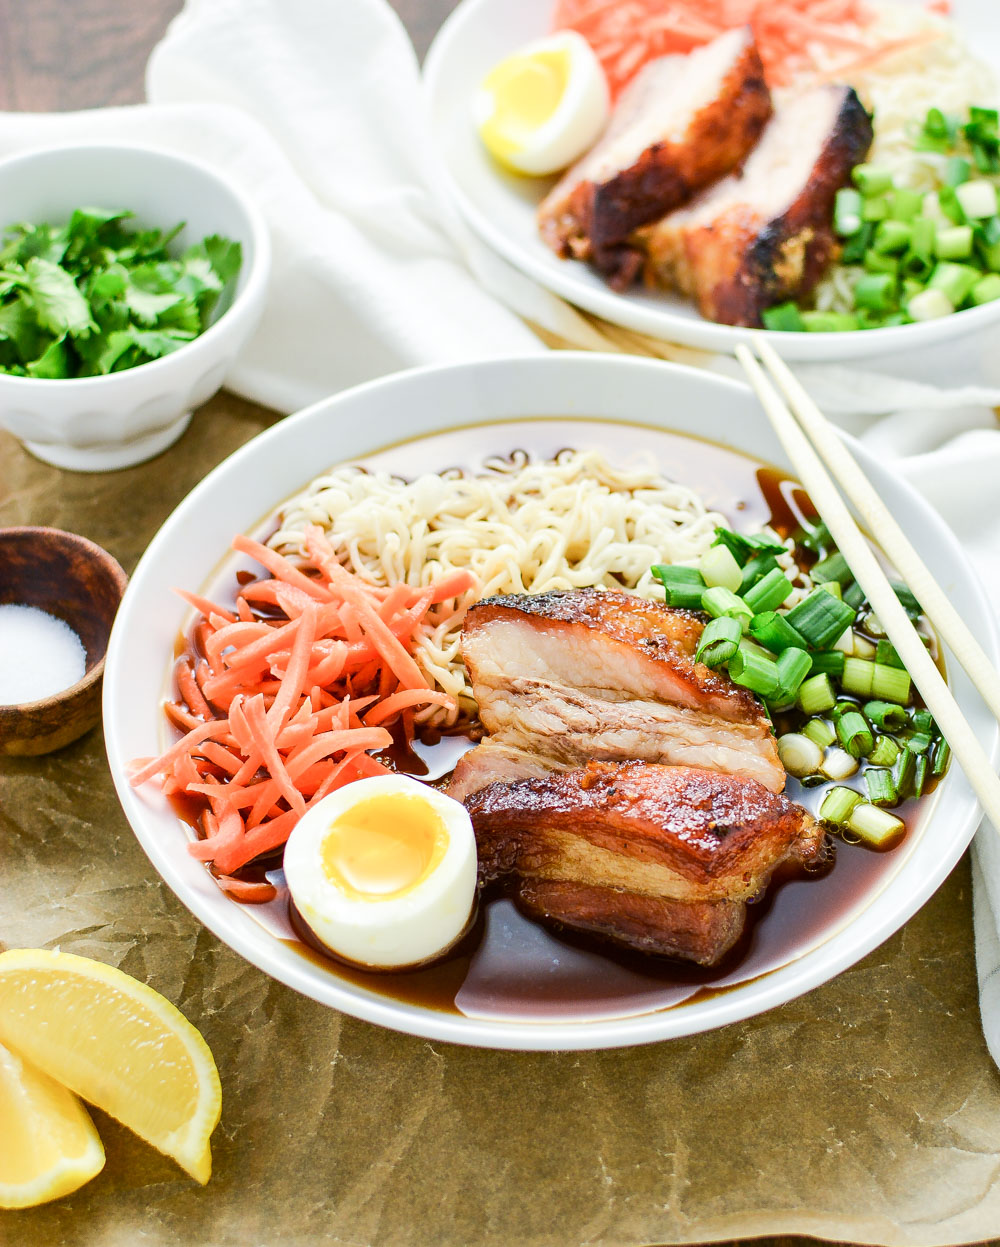 Beer-Braised Pork Belly Ramen is a scrumptious noodle dish that's made with a homemade ginger-flavored broth and tender beer-braised pork belly.